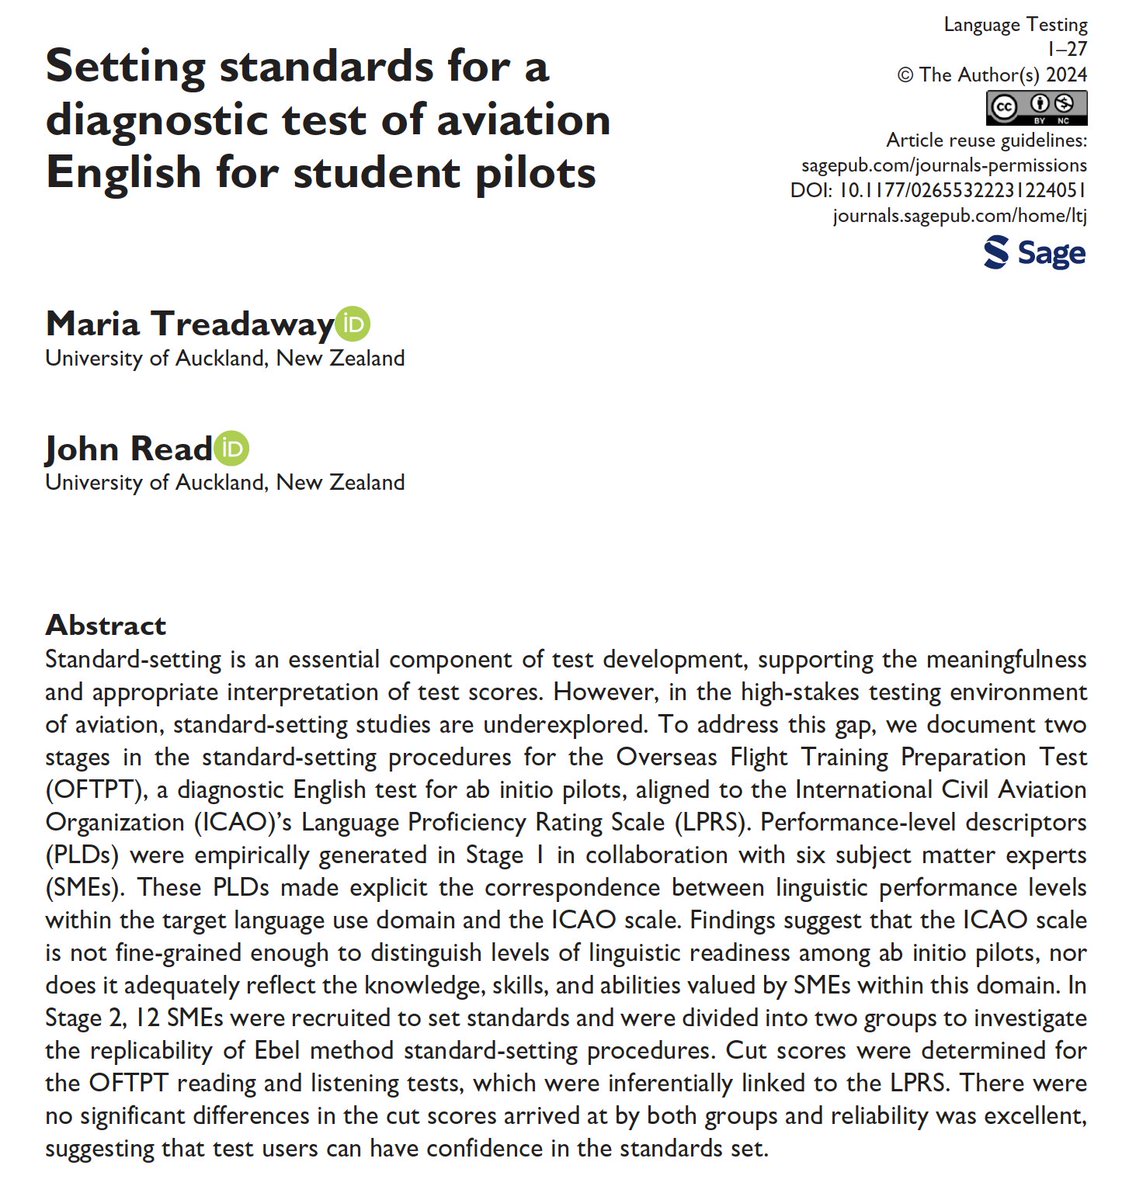 Now available in Online First, Maria Treadaway and John Read (@AucklandUni) present standard-setting procedures for the Overseas Flight Training Preparation Test (Treadaway, 2021), a diagnostic English proficiency test for ab initio cadet pilots. journals.sagepub.com/doi/10.1177/02…